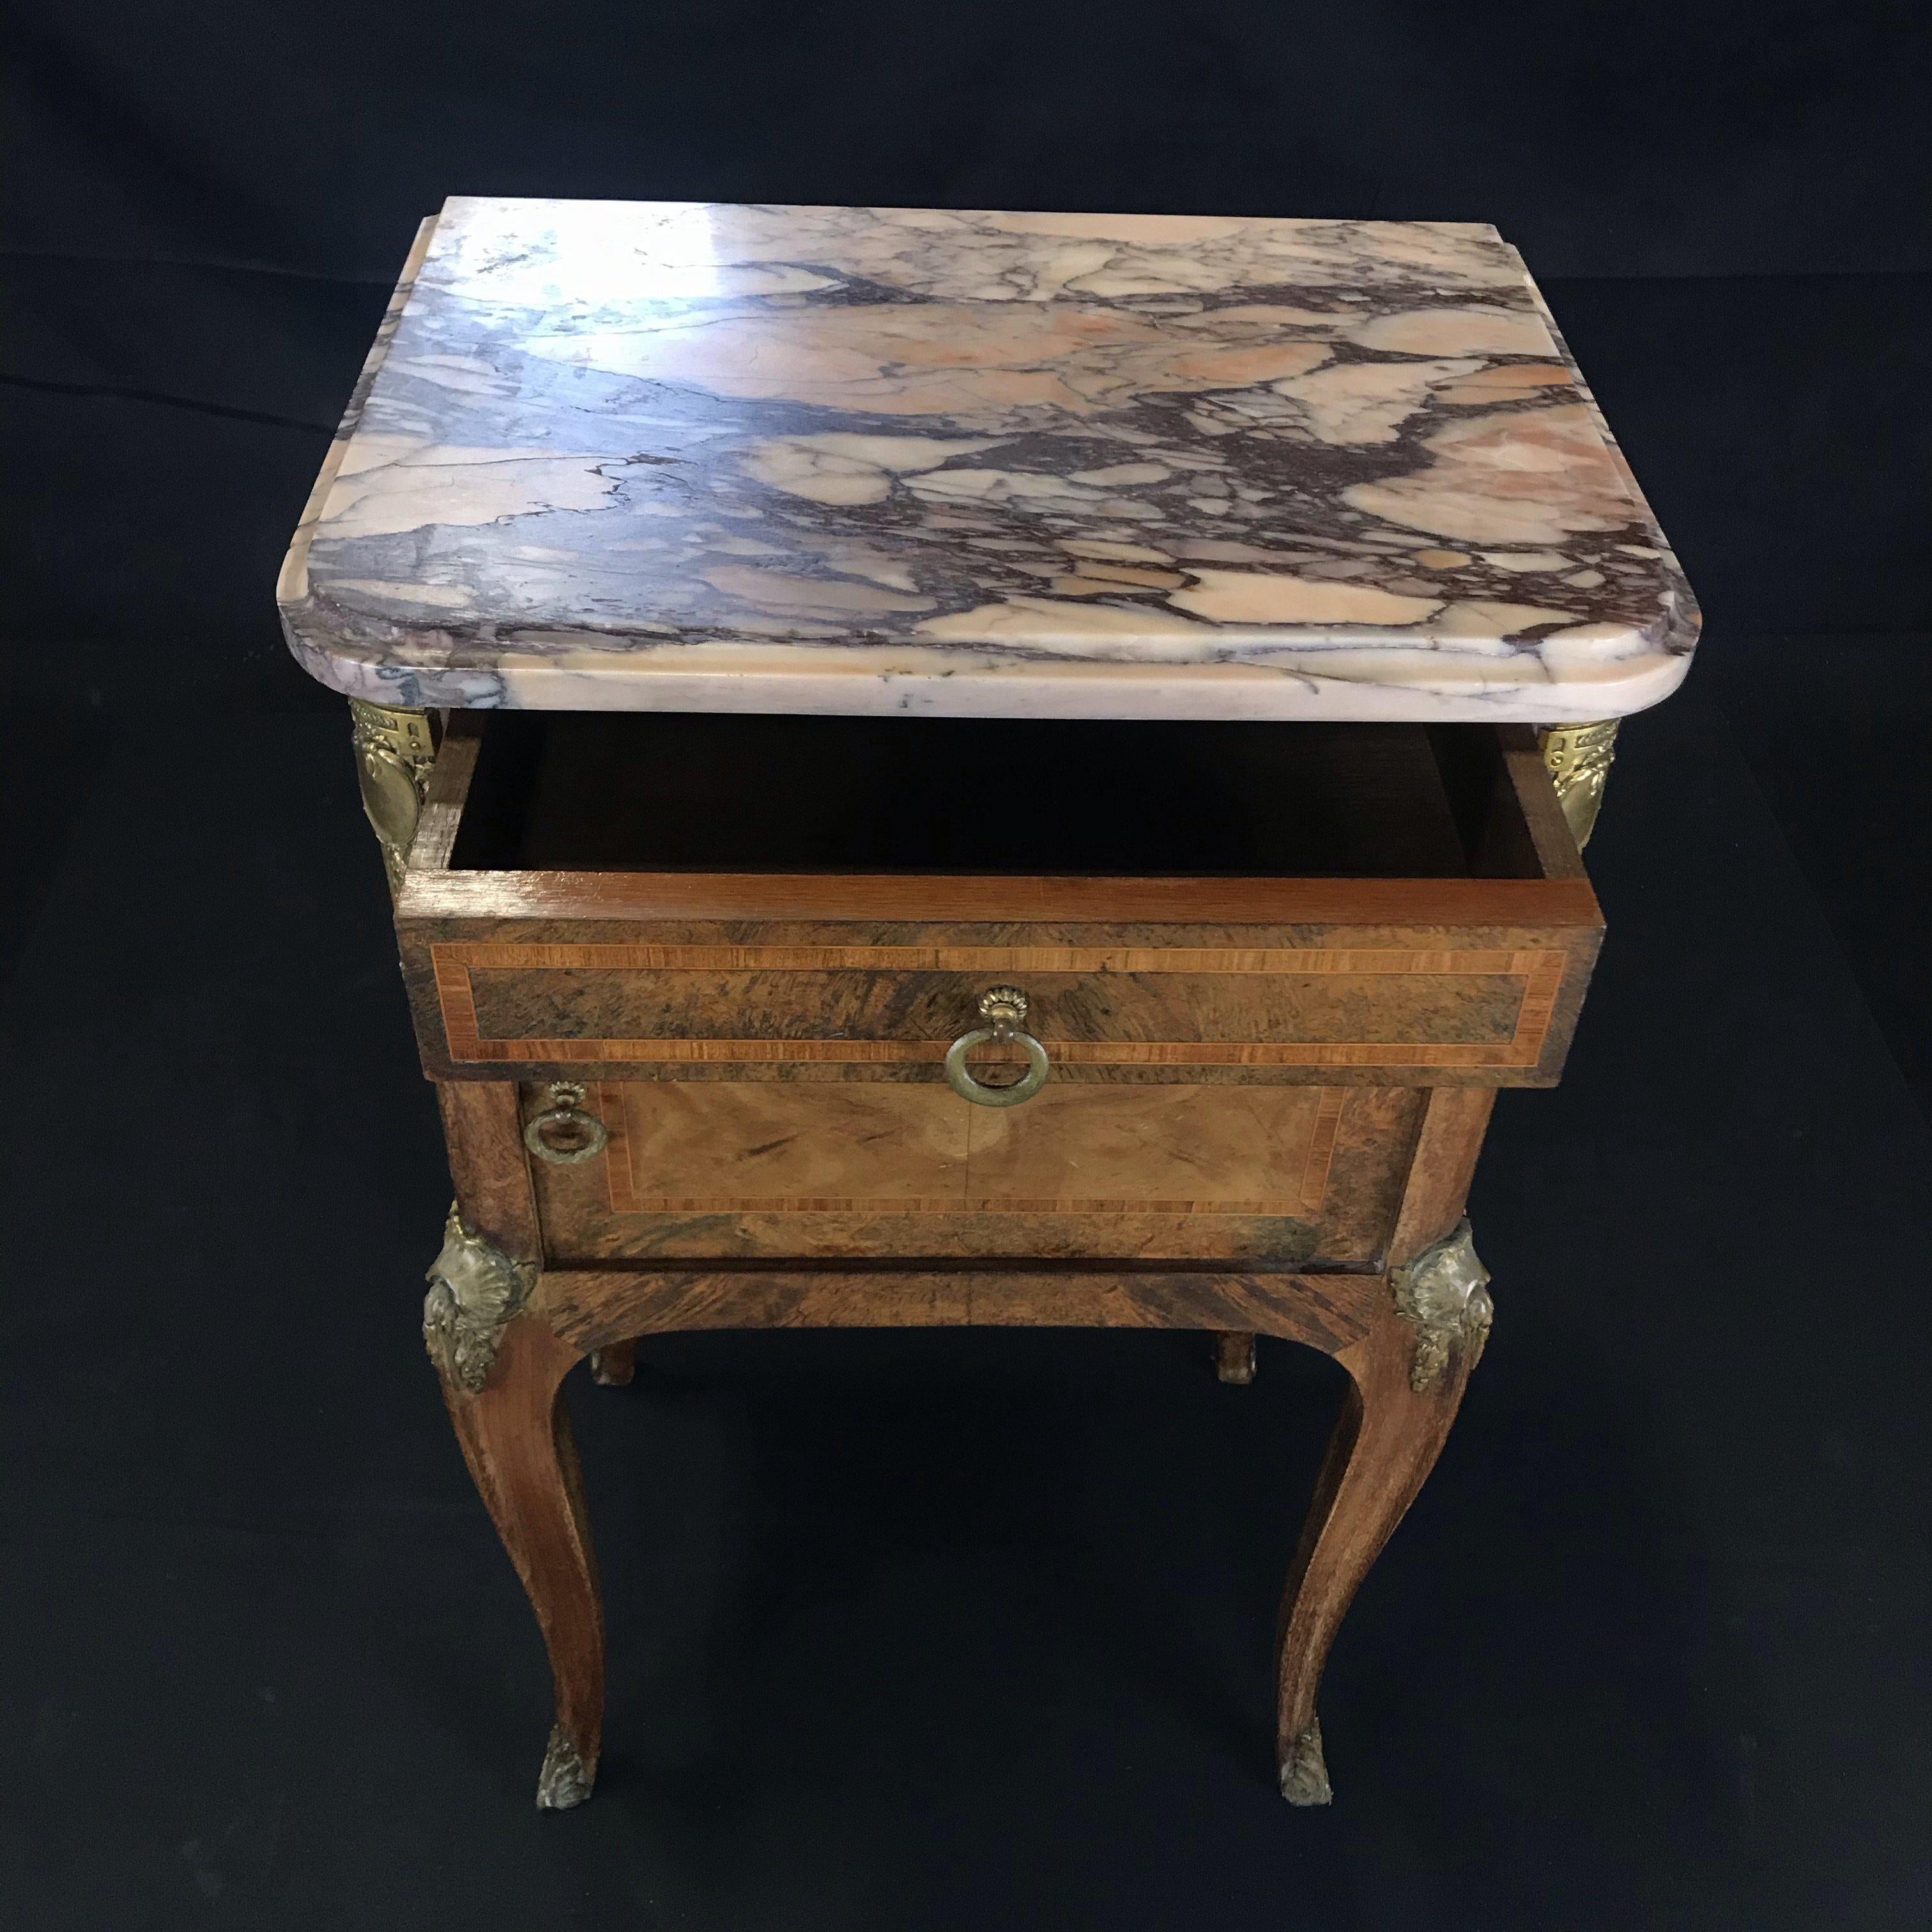 Special and lovely antique French walnut inlaid side cabinet or night stand having rouge and beige marble top and golden bronze adornments. Single drawer above cupboard. Very good antique condition for its age with only minor marks of use.

#3692.